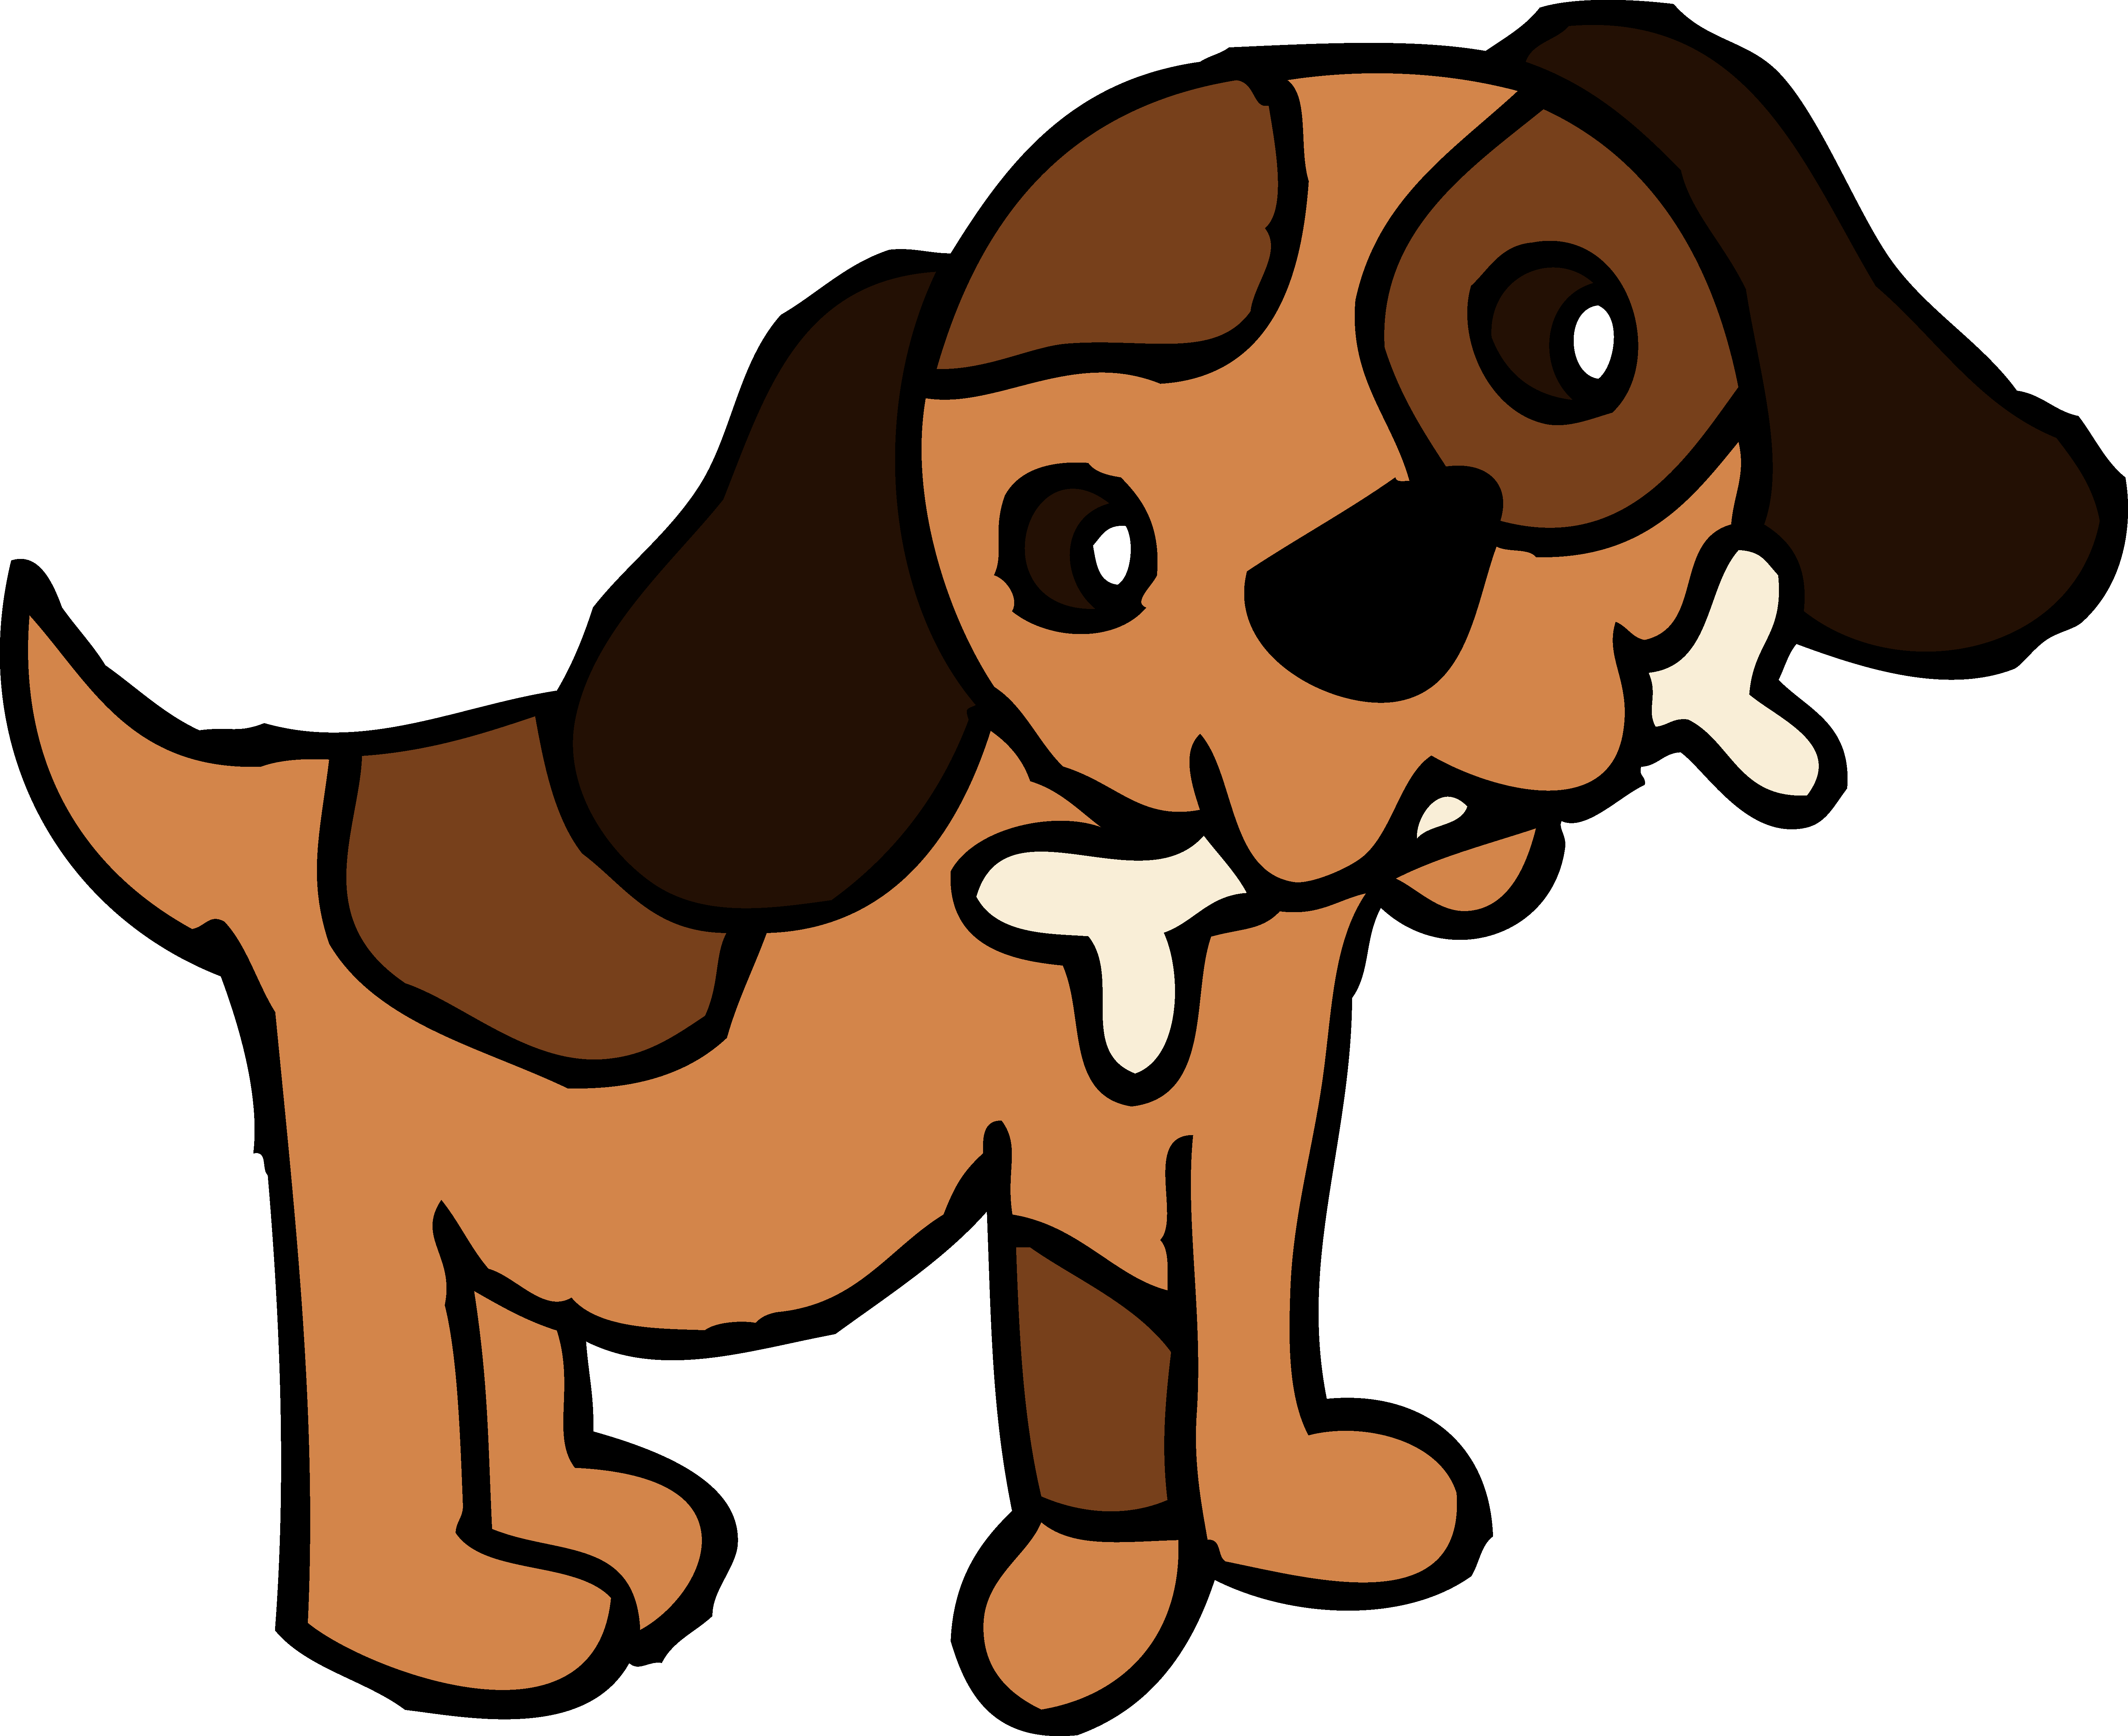 Cute dog clipart free clipart images - Cliparting.com